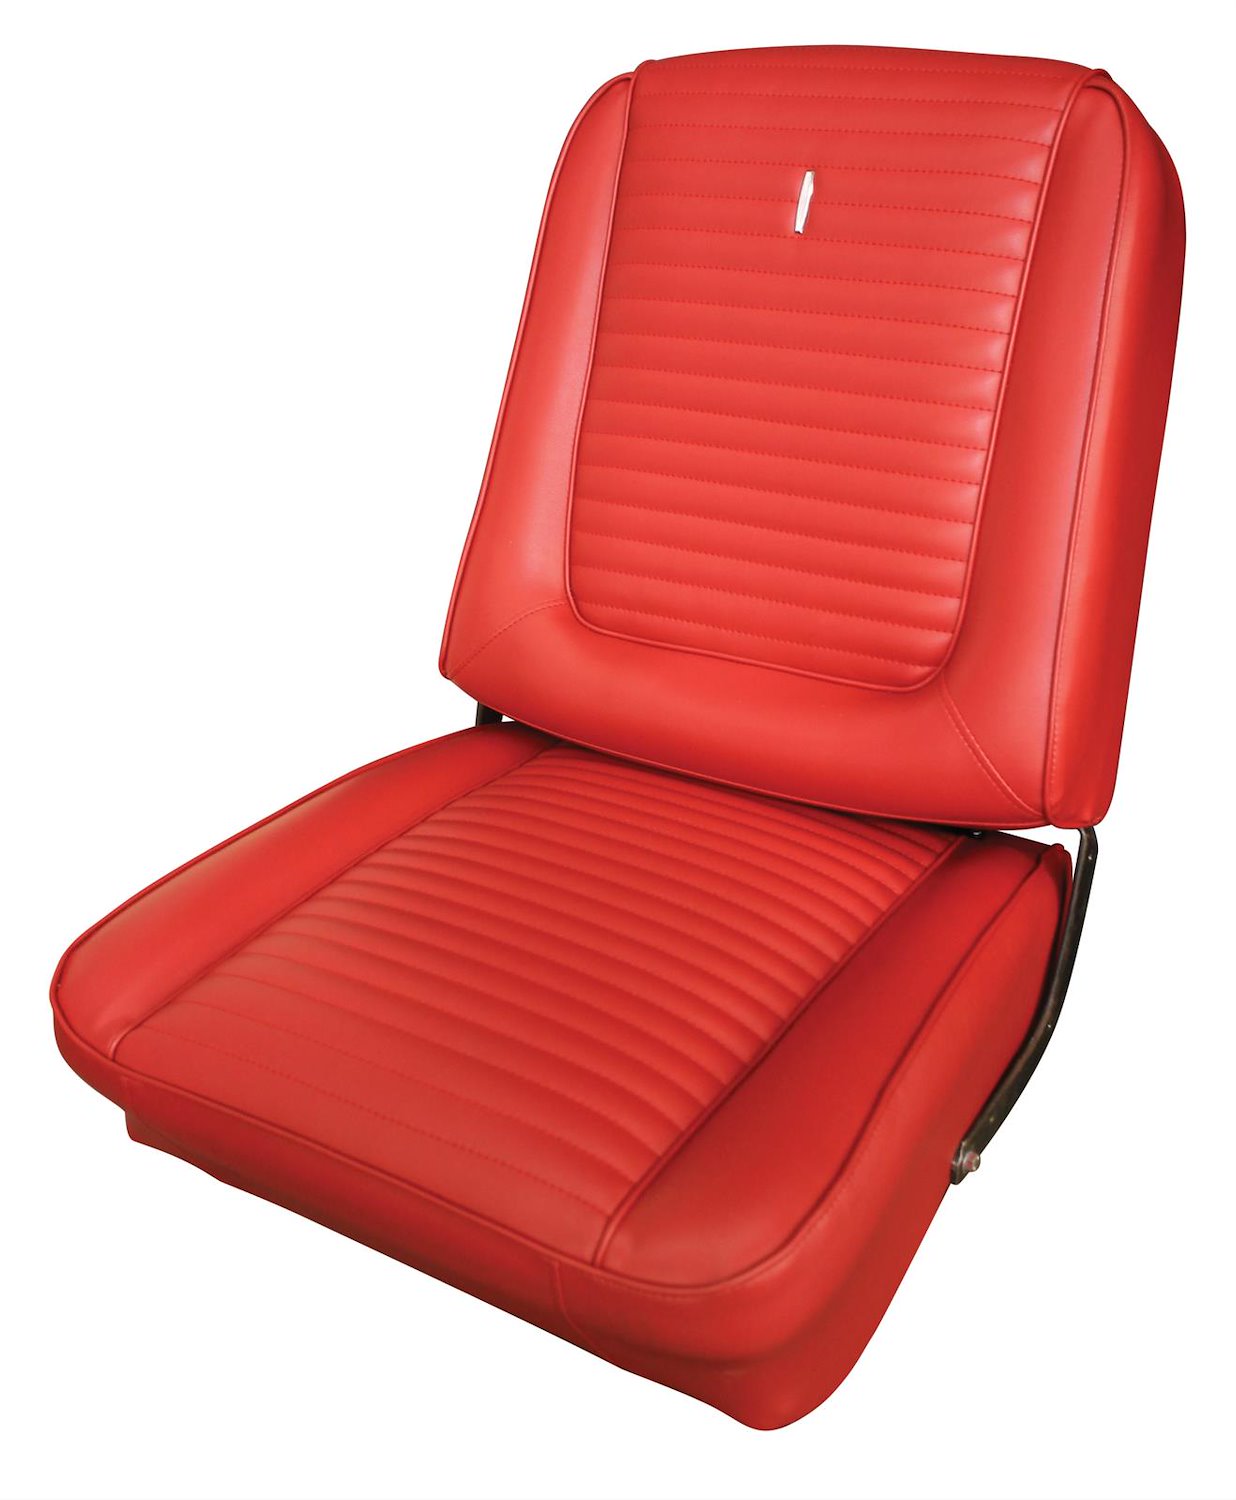 1973 Chevrolet Camaro Standard Interior Front Bucket and Rear Bench Seat Upholstery Set